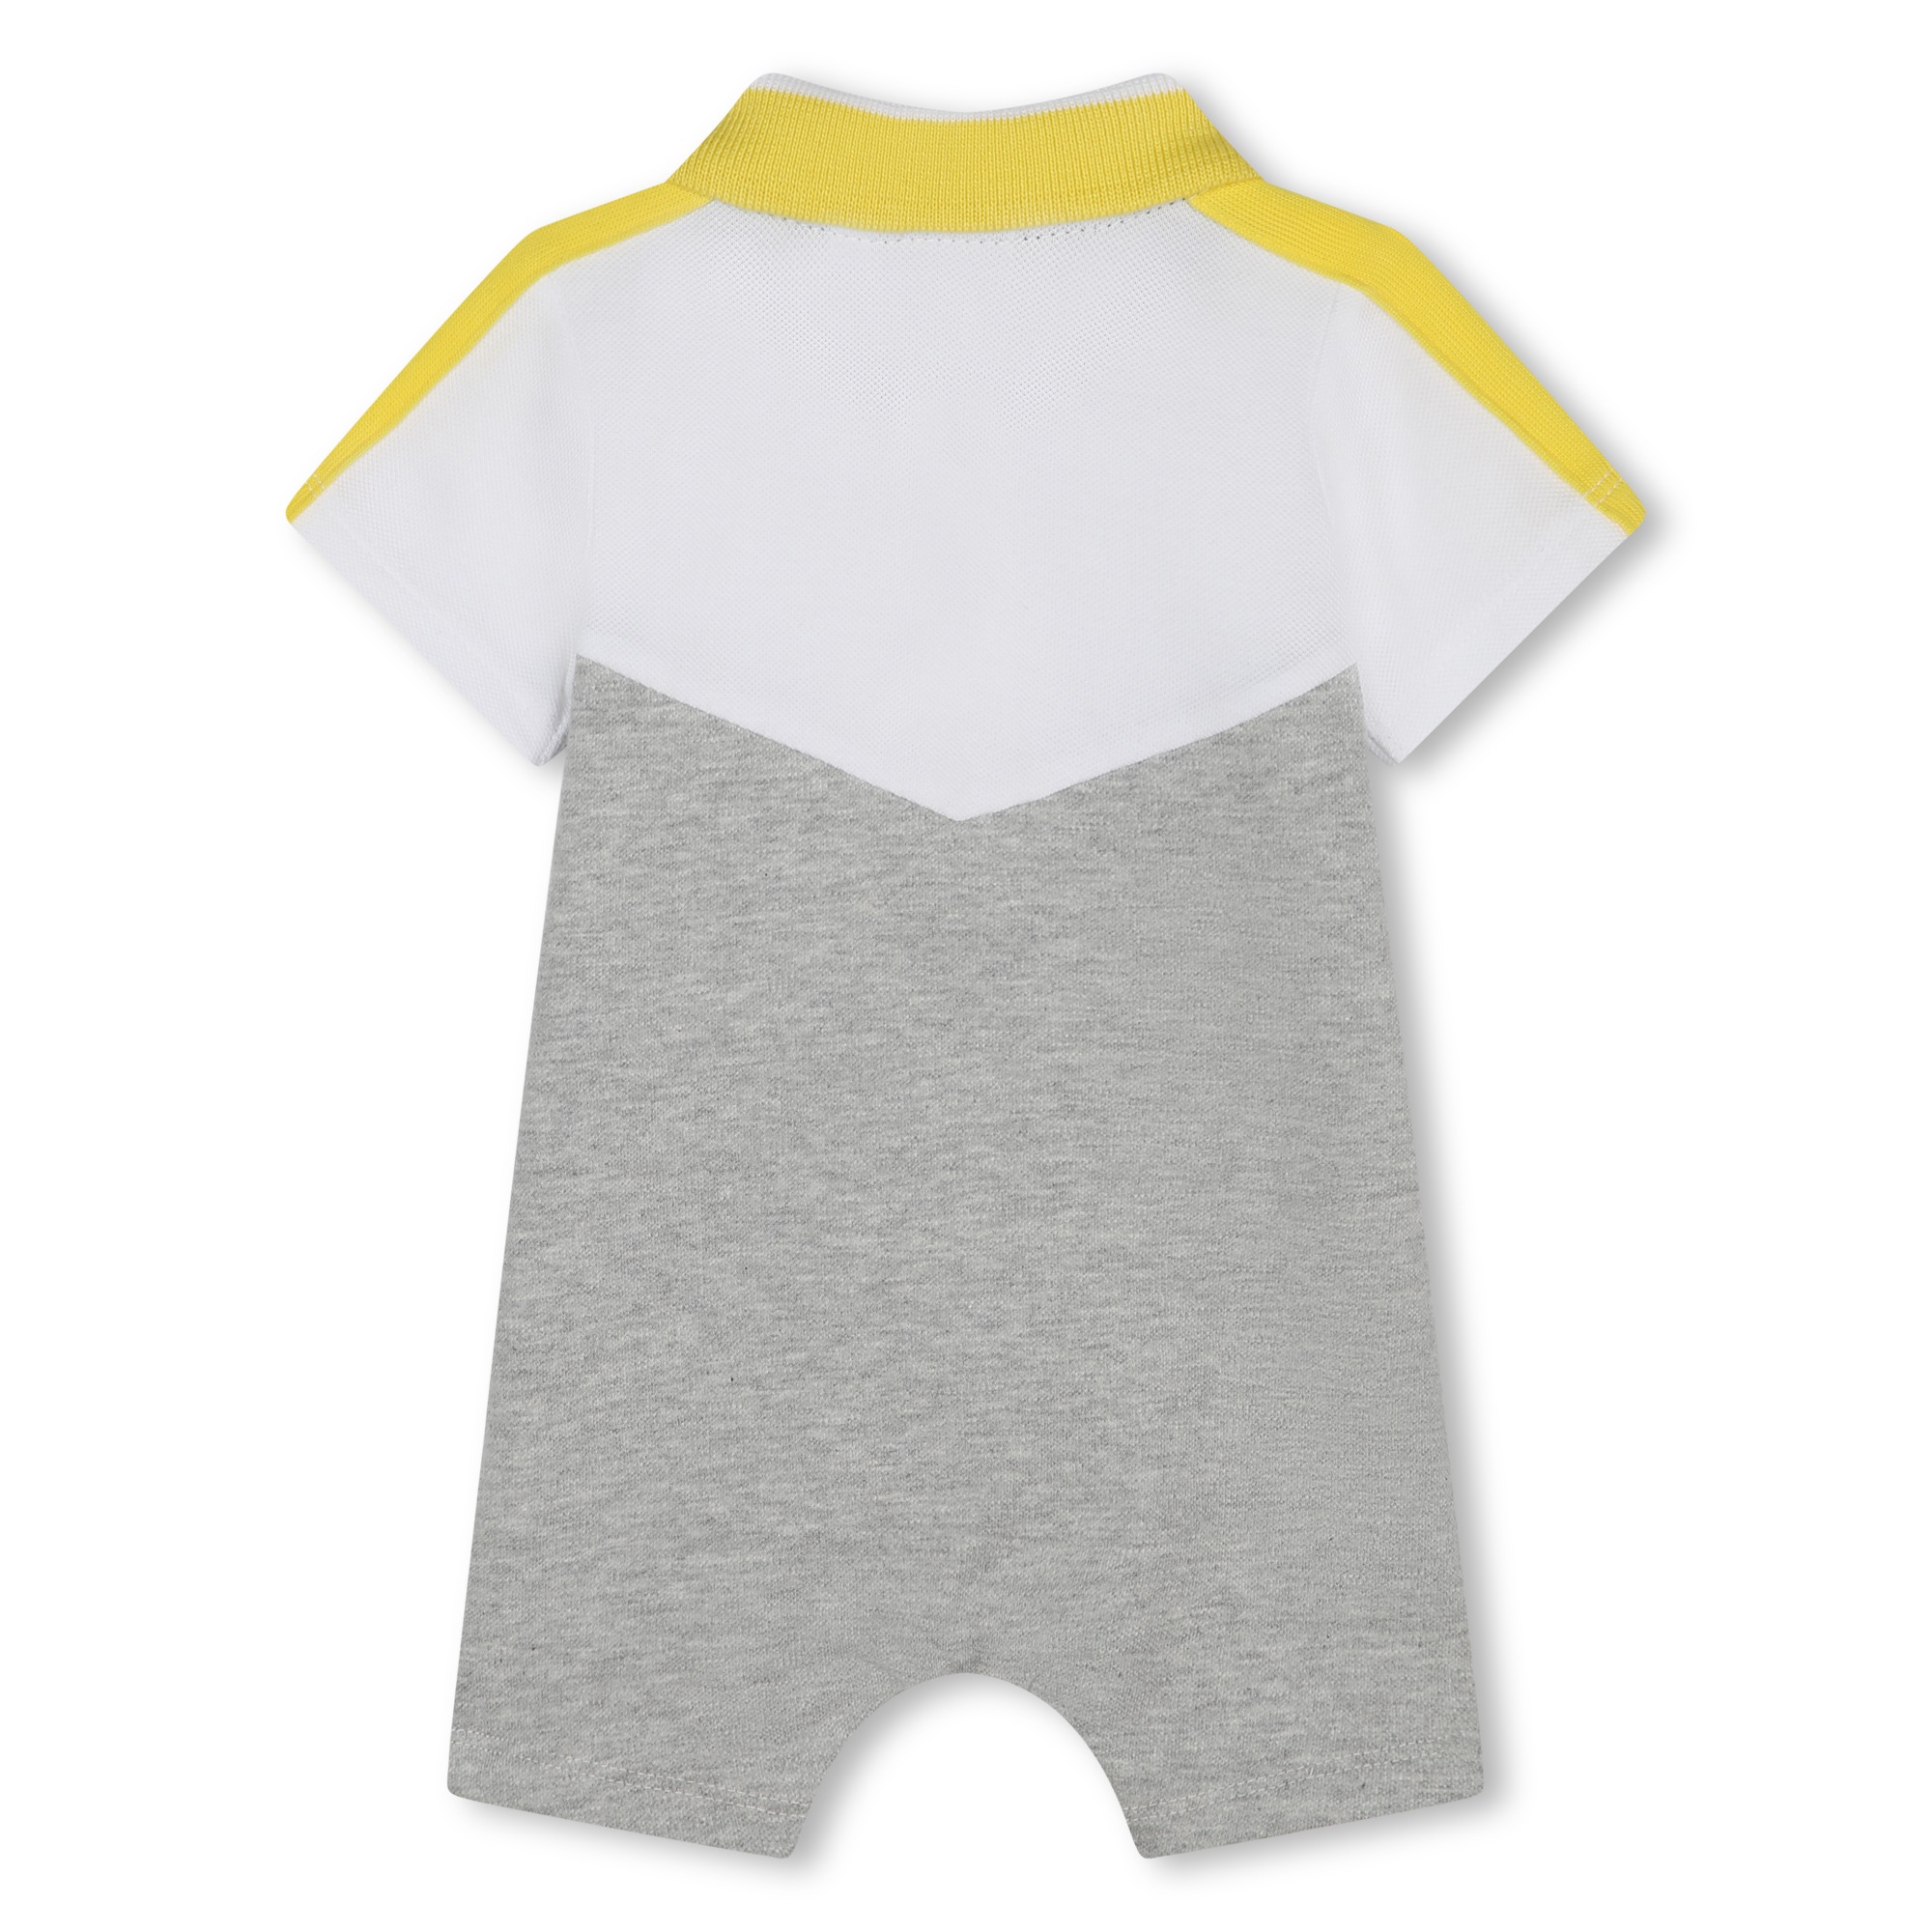 Cotton playsuit BOSS for BOY